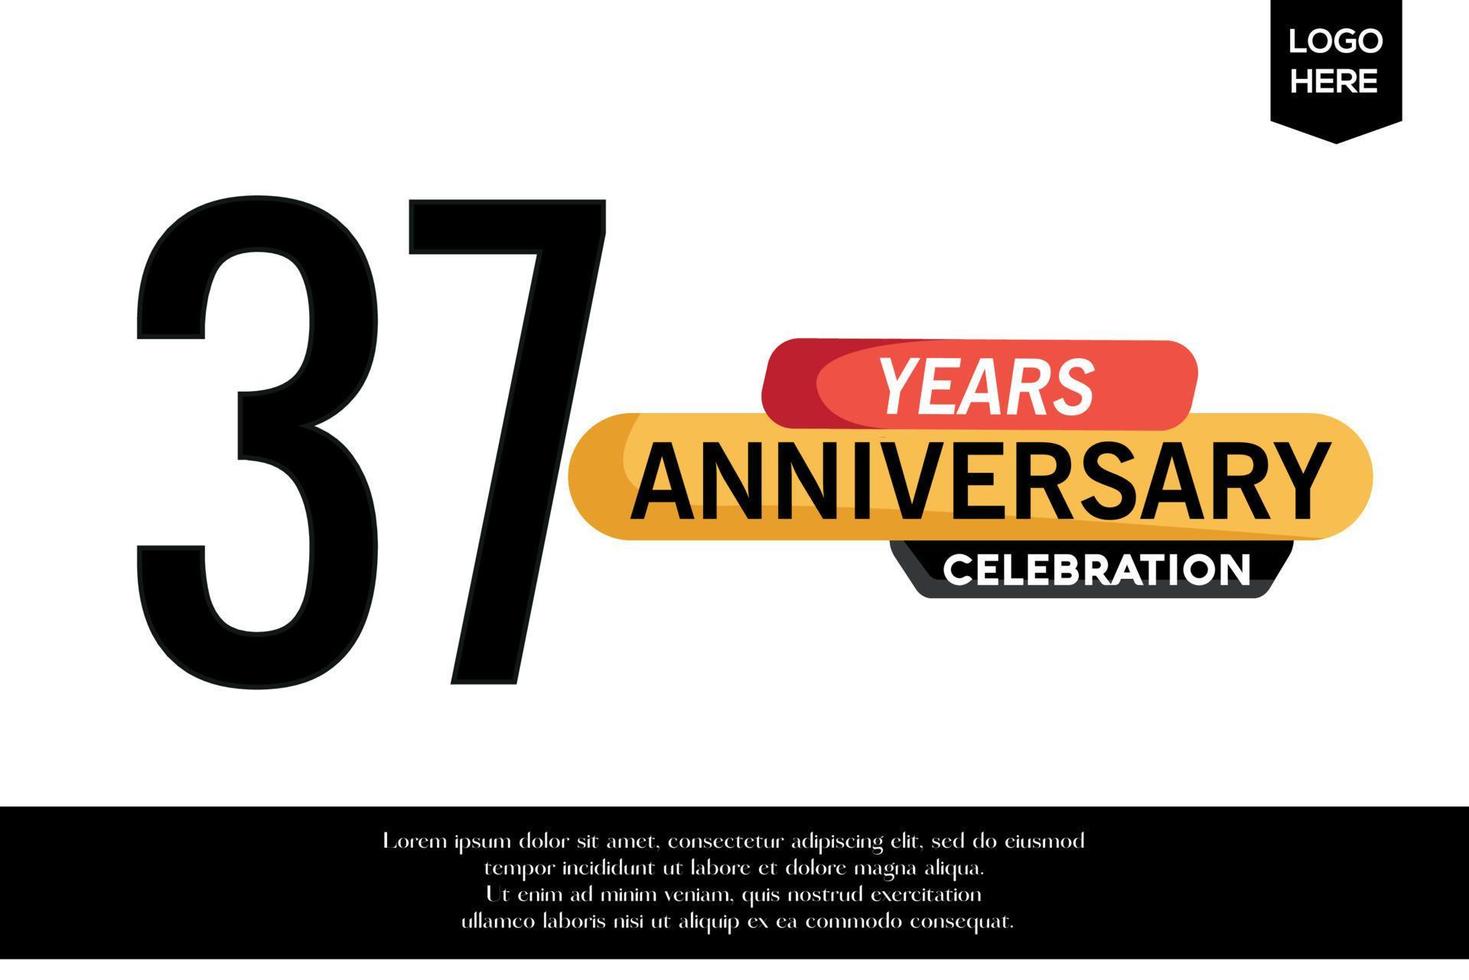 37th anniversary celebration logotype black yellow colored with text in gray color isolated on white background vector template design